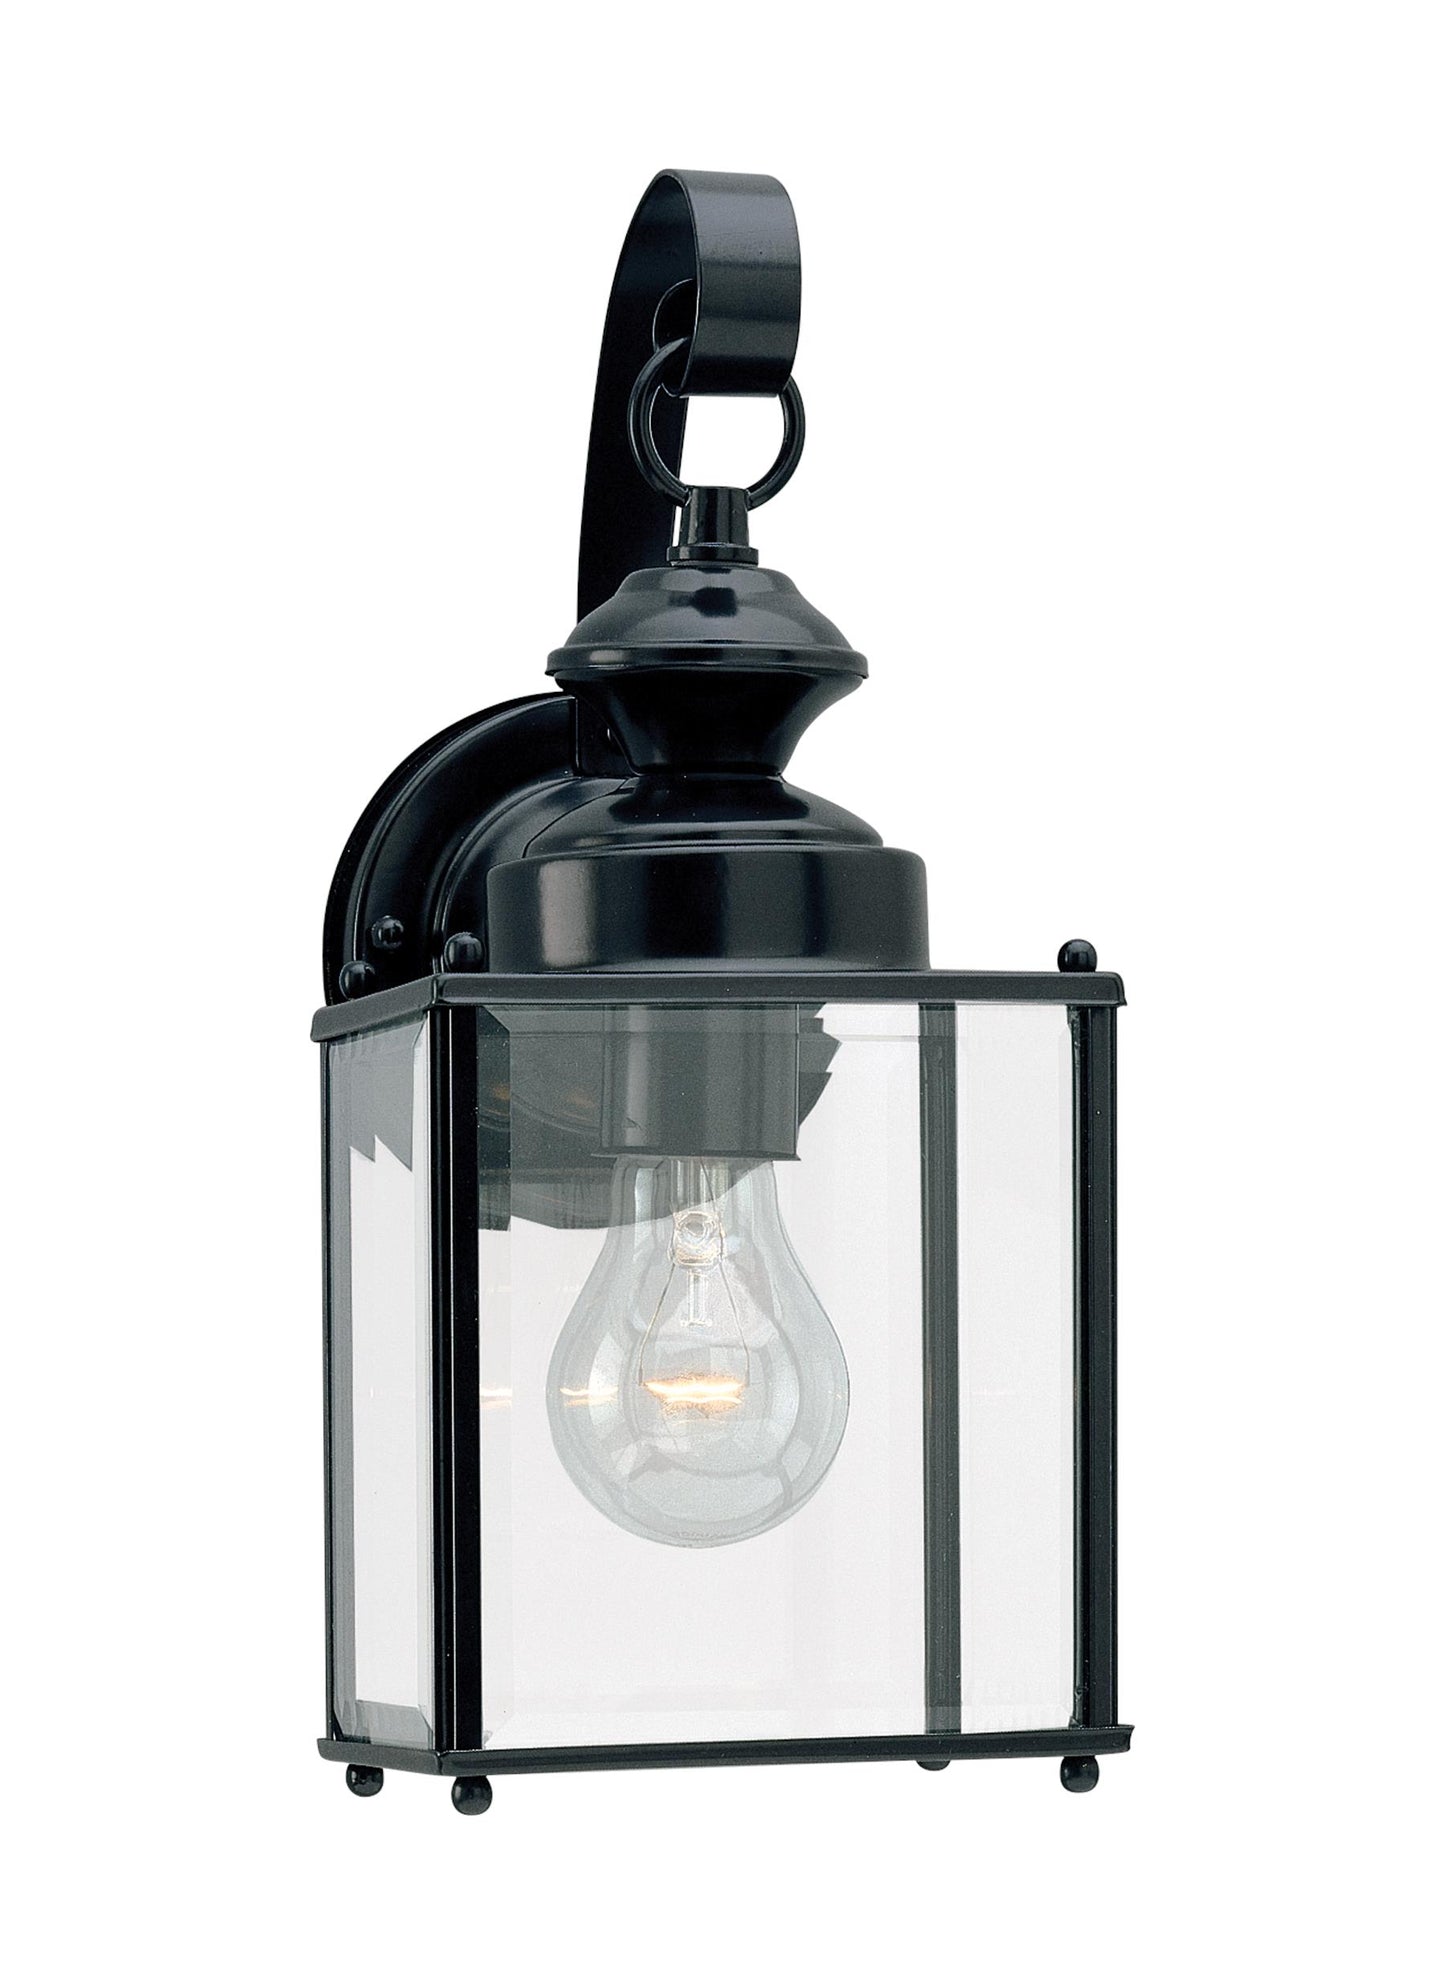 Jamestowne transitional 1-light medium outdoor exterior wall lantern in black finish with clear beveled glass panels